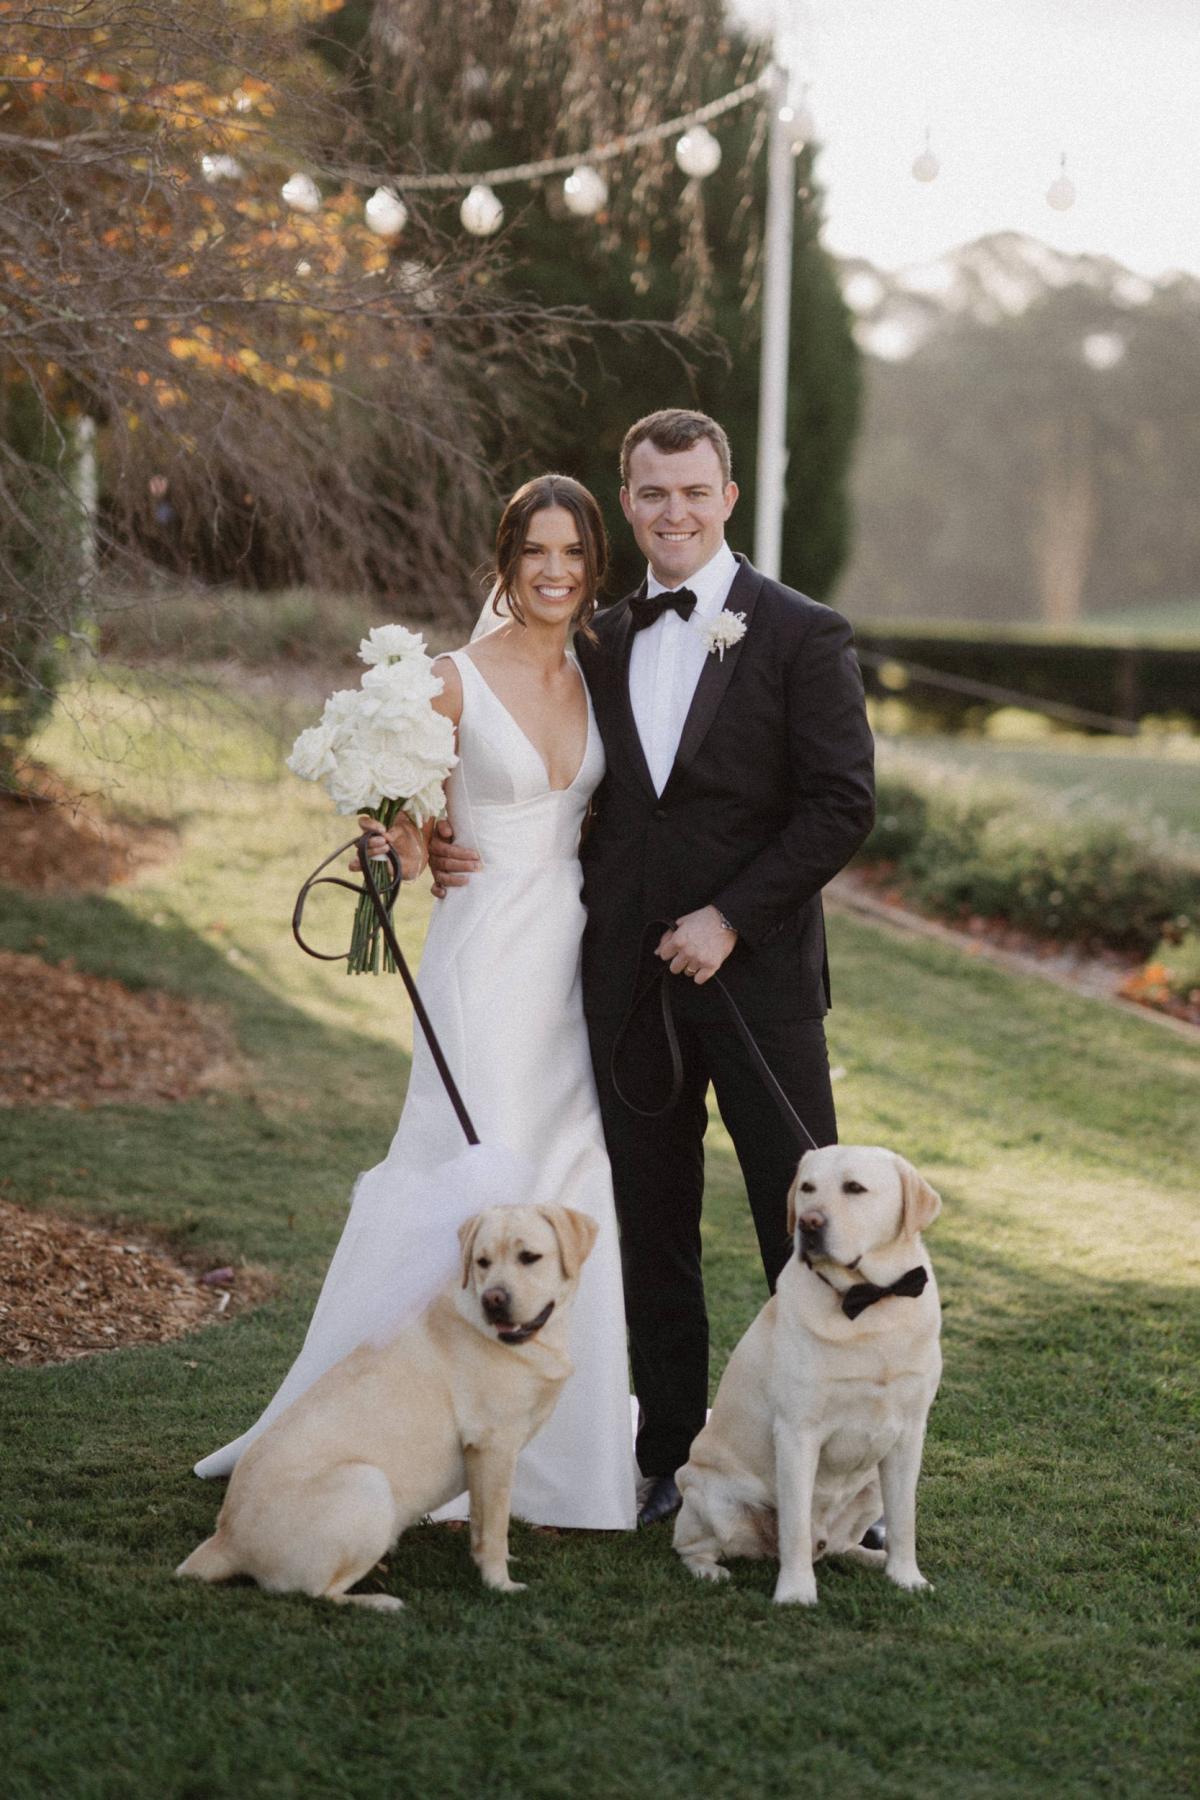 Real bride Charlotte and Myles taking photos with their two blond labs who are wearing black bowties. She wears the elegant Leonie Alexia gown by KWH.